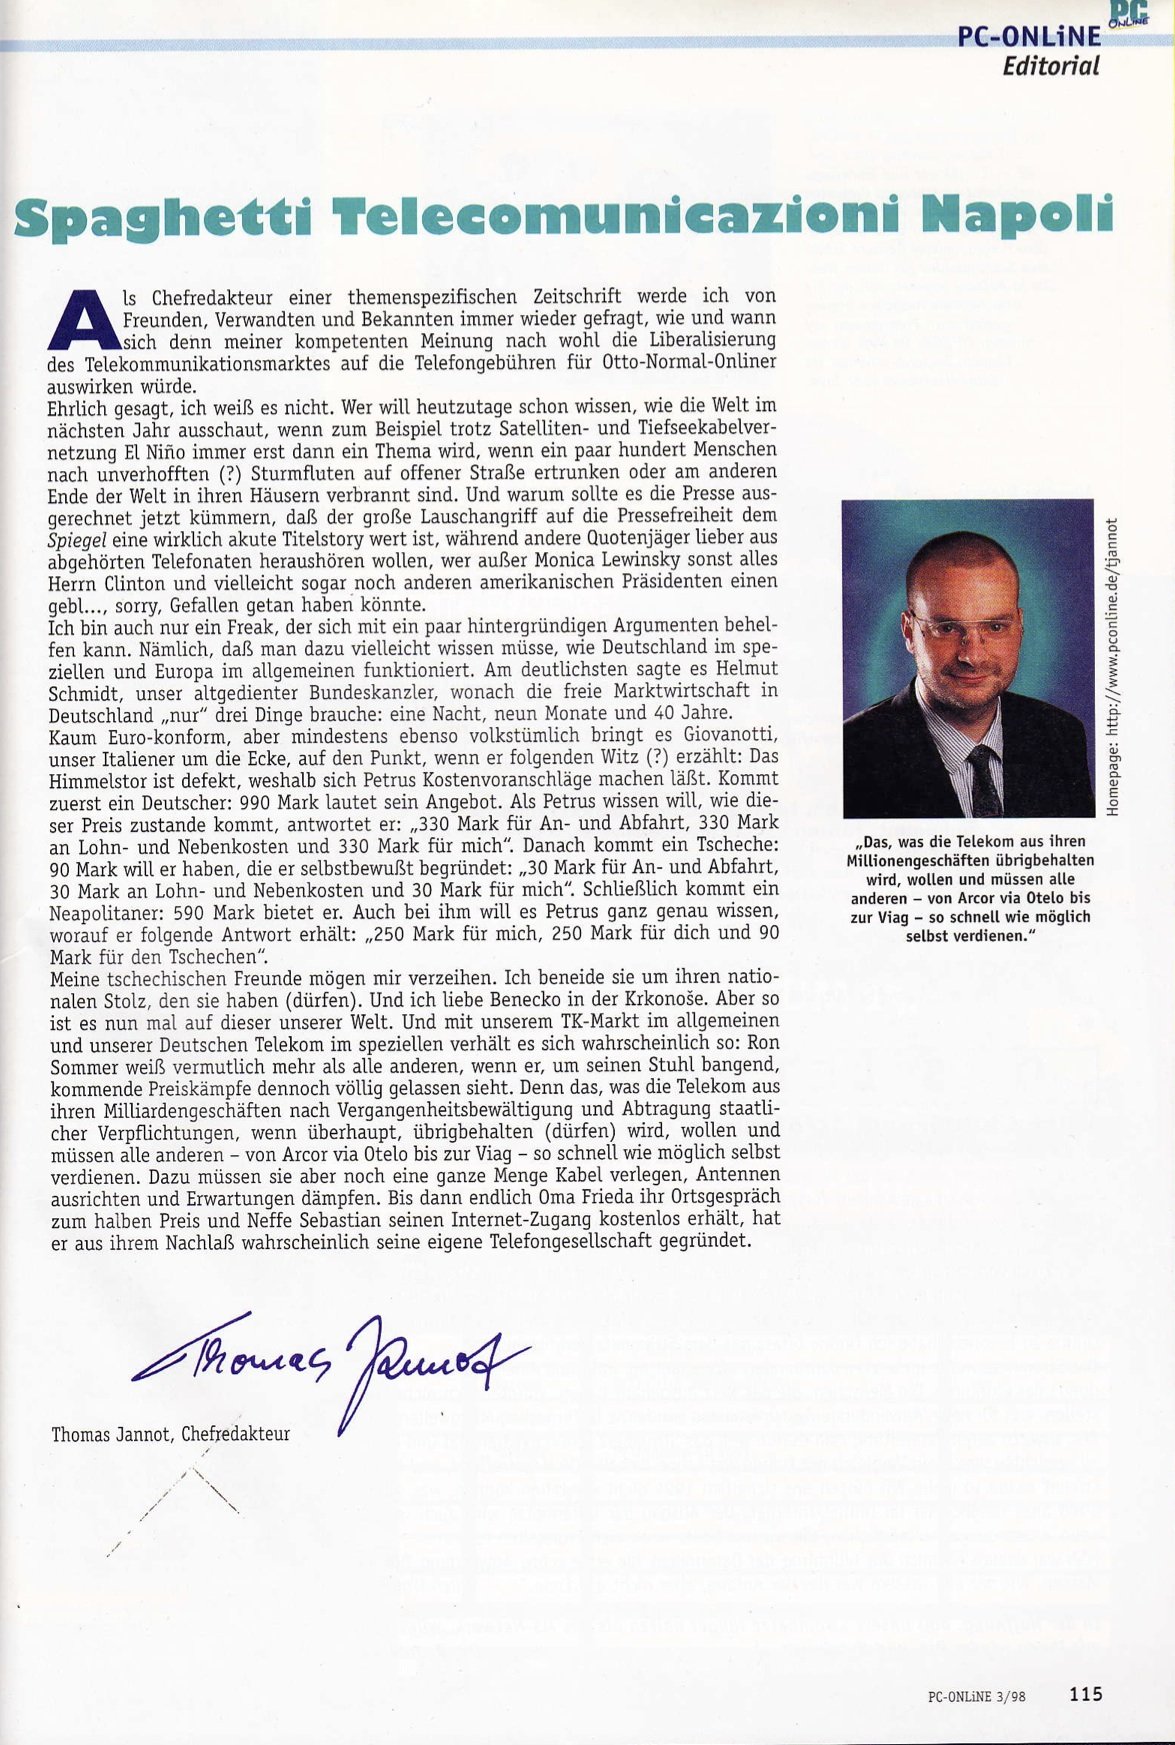 Thomas Jannot in PC-ONLiNE 1998-03